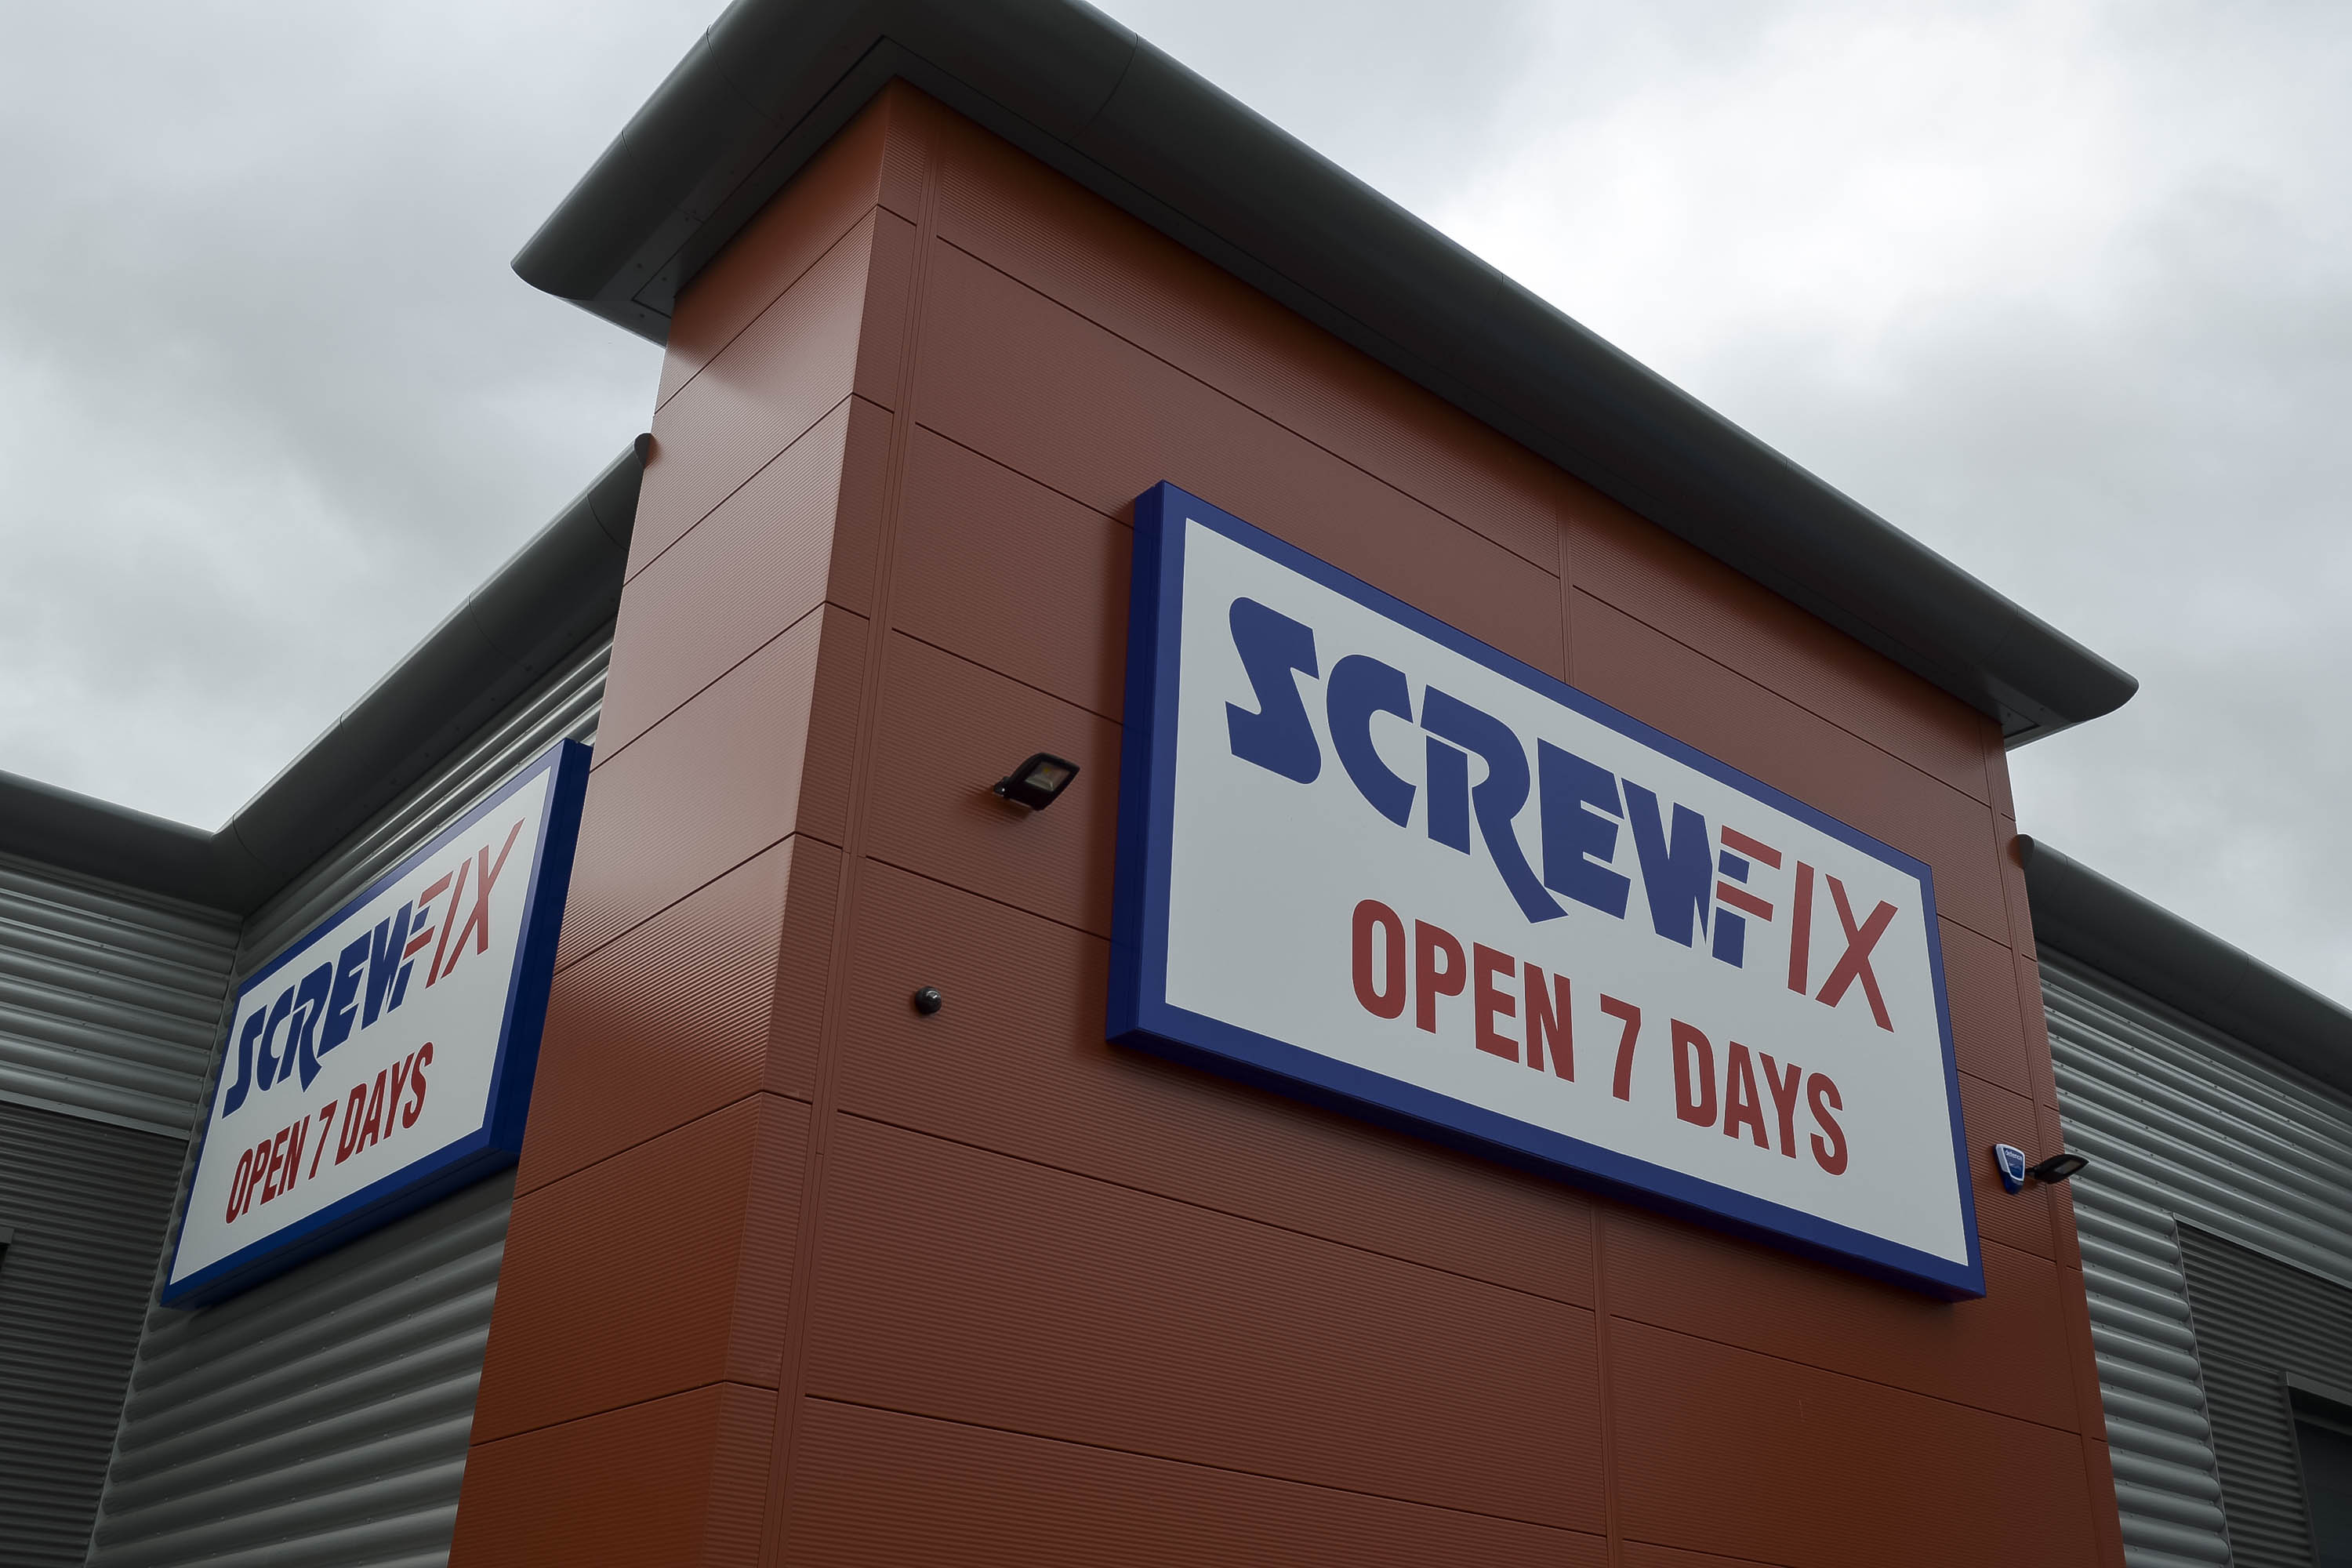 New Screwfix store to open in Battersea